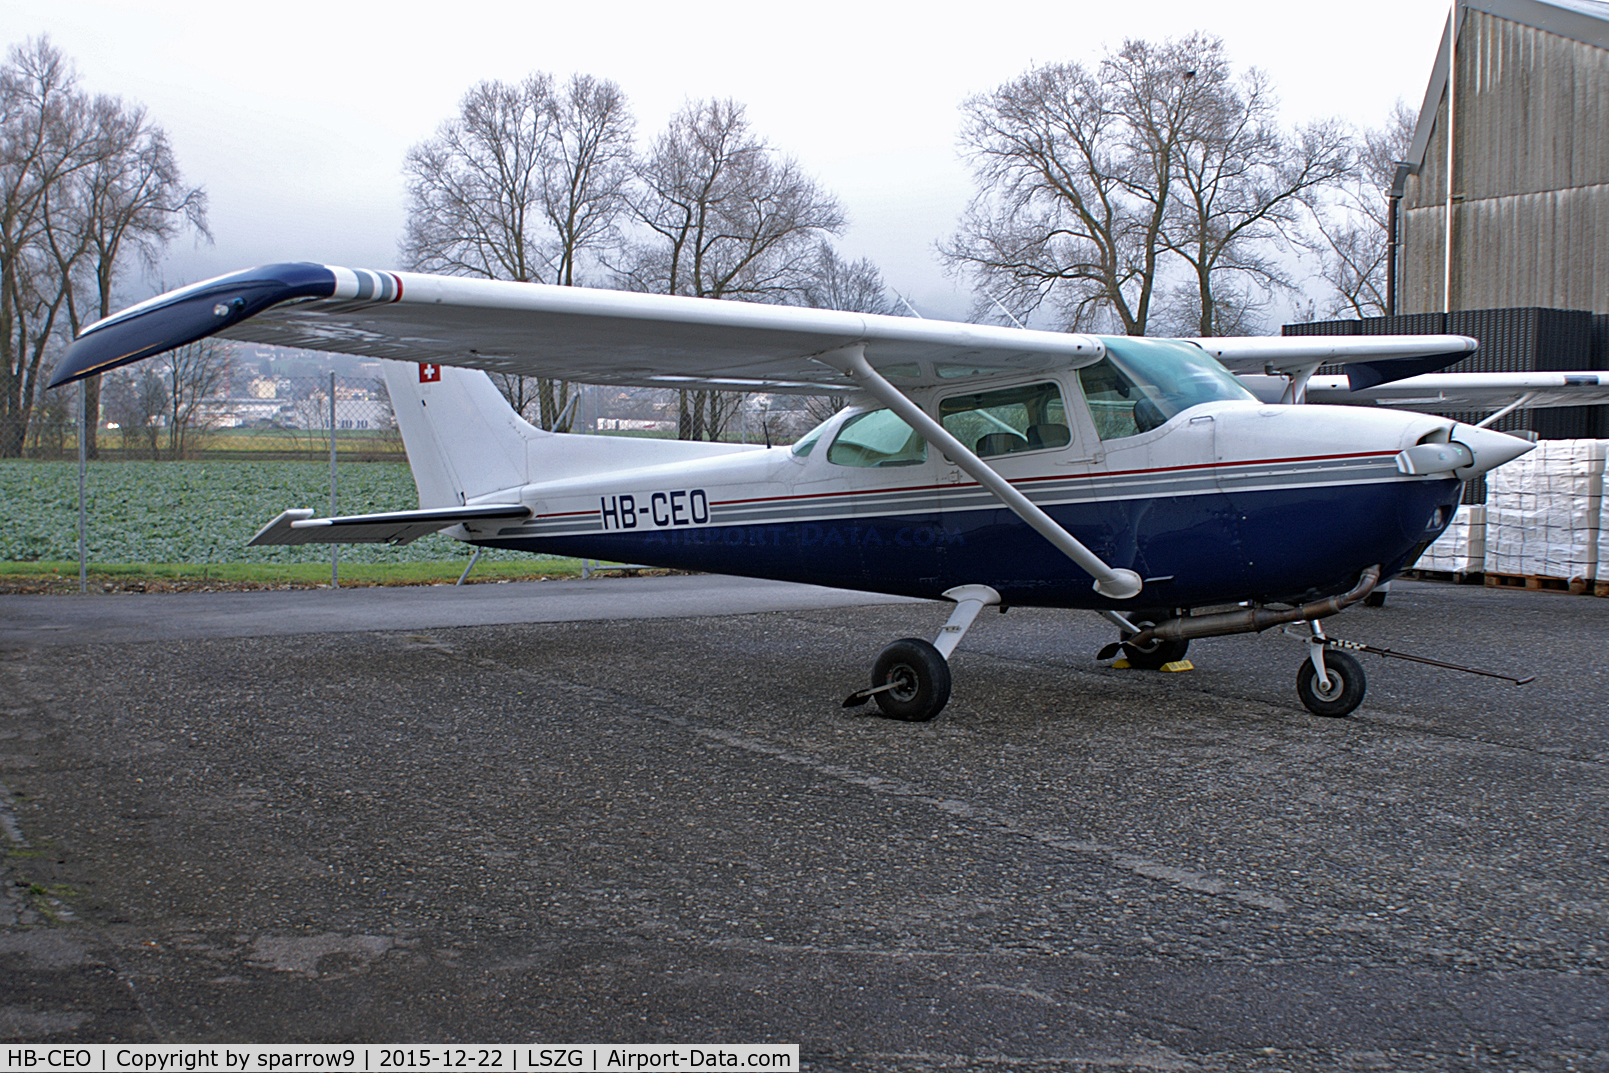 HB-CEO, 1975 Cessna 172M Skyhawk C/N 17265929, Waiting for a new paint job. Deregistered 2017-06-21. Overturned during landing on a French altisurface.